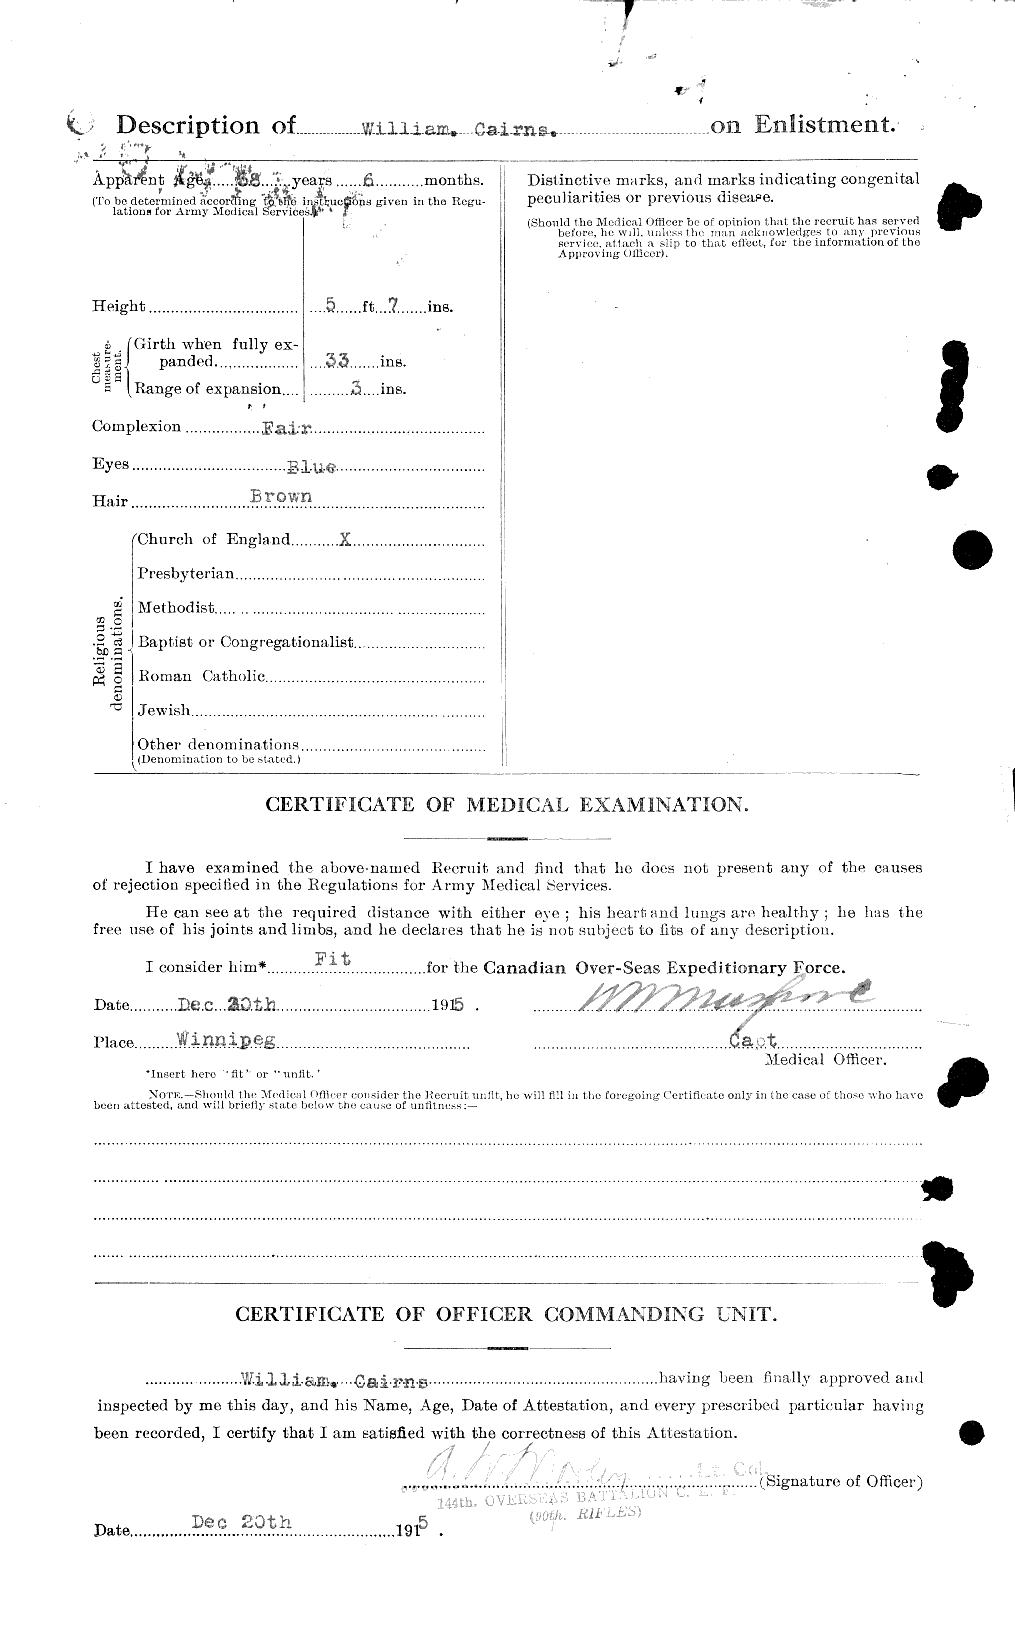 Personnel Records of the First World War - CEF 000539b